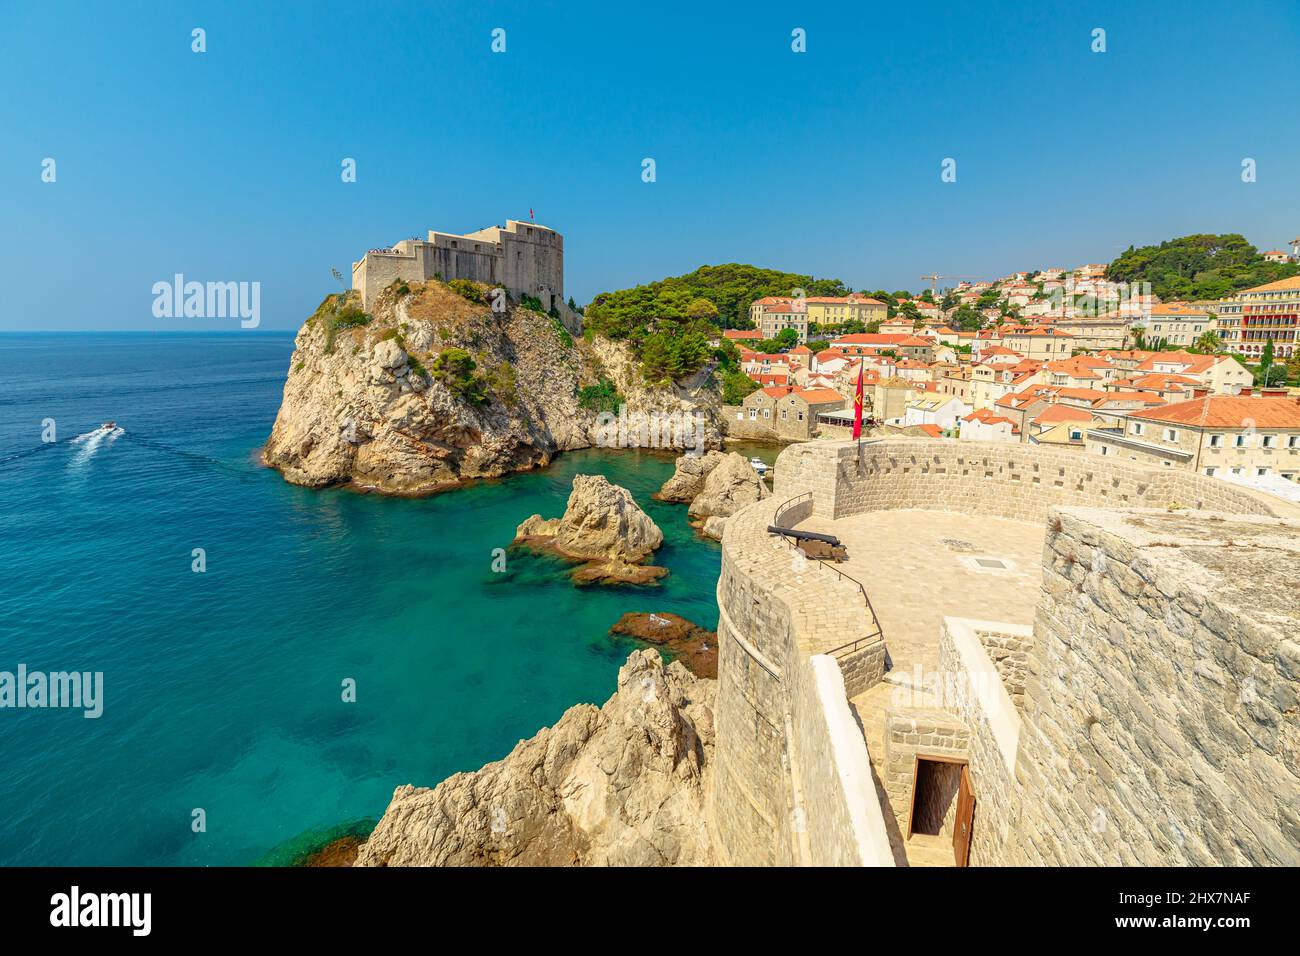 Aerial view on top walls of Dubrovnik city of Croatia. Looking Fort Lovrijenac fortress, over the West Harbour. Dubrovnik historic city of Croatia in Stock Photo